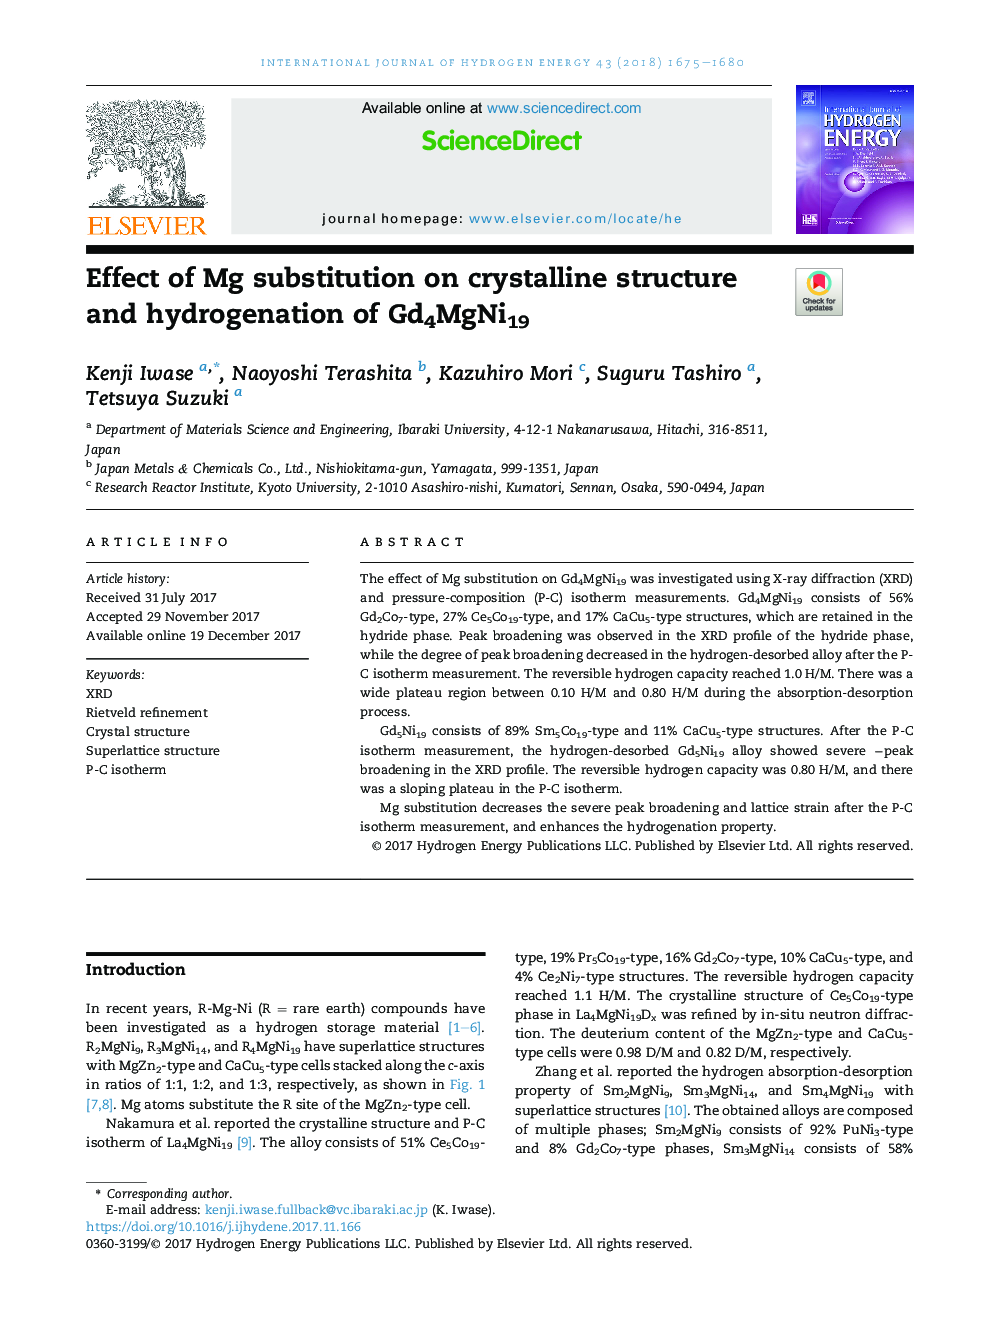 Effect of Mg substitution on crystalline structure and hydrogenation of Gd4MgNi19